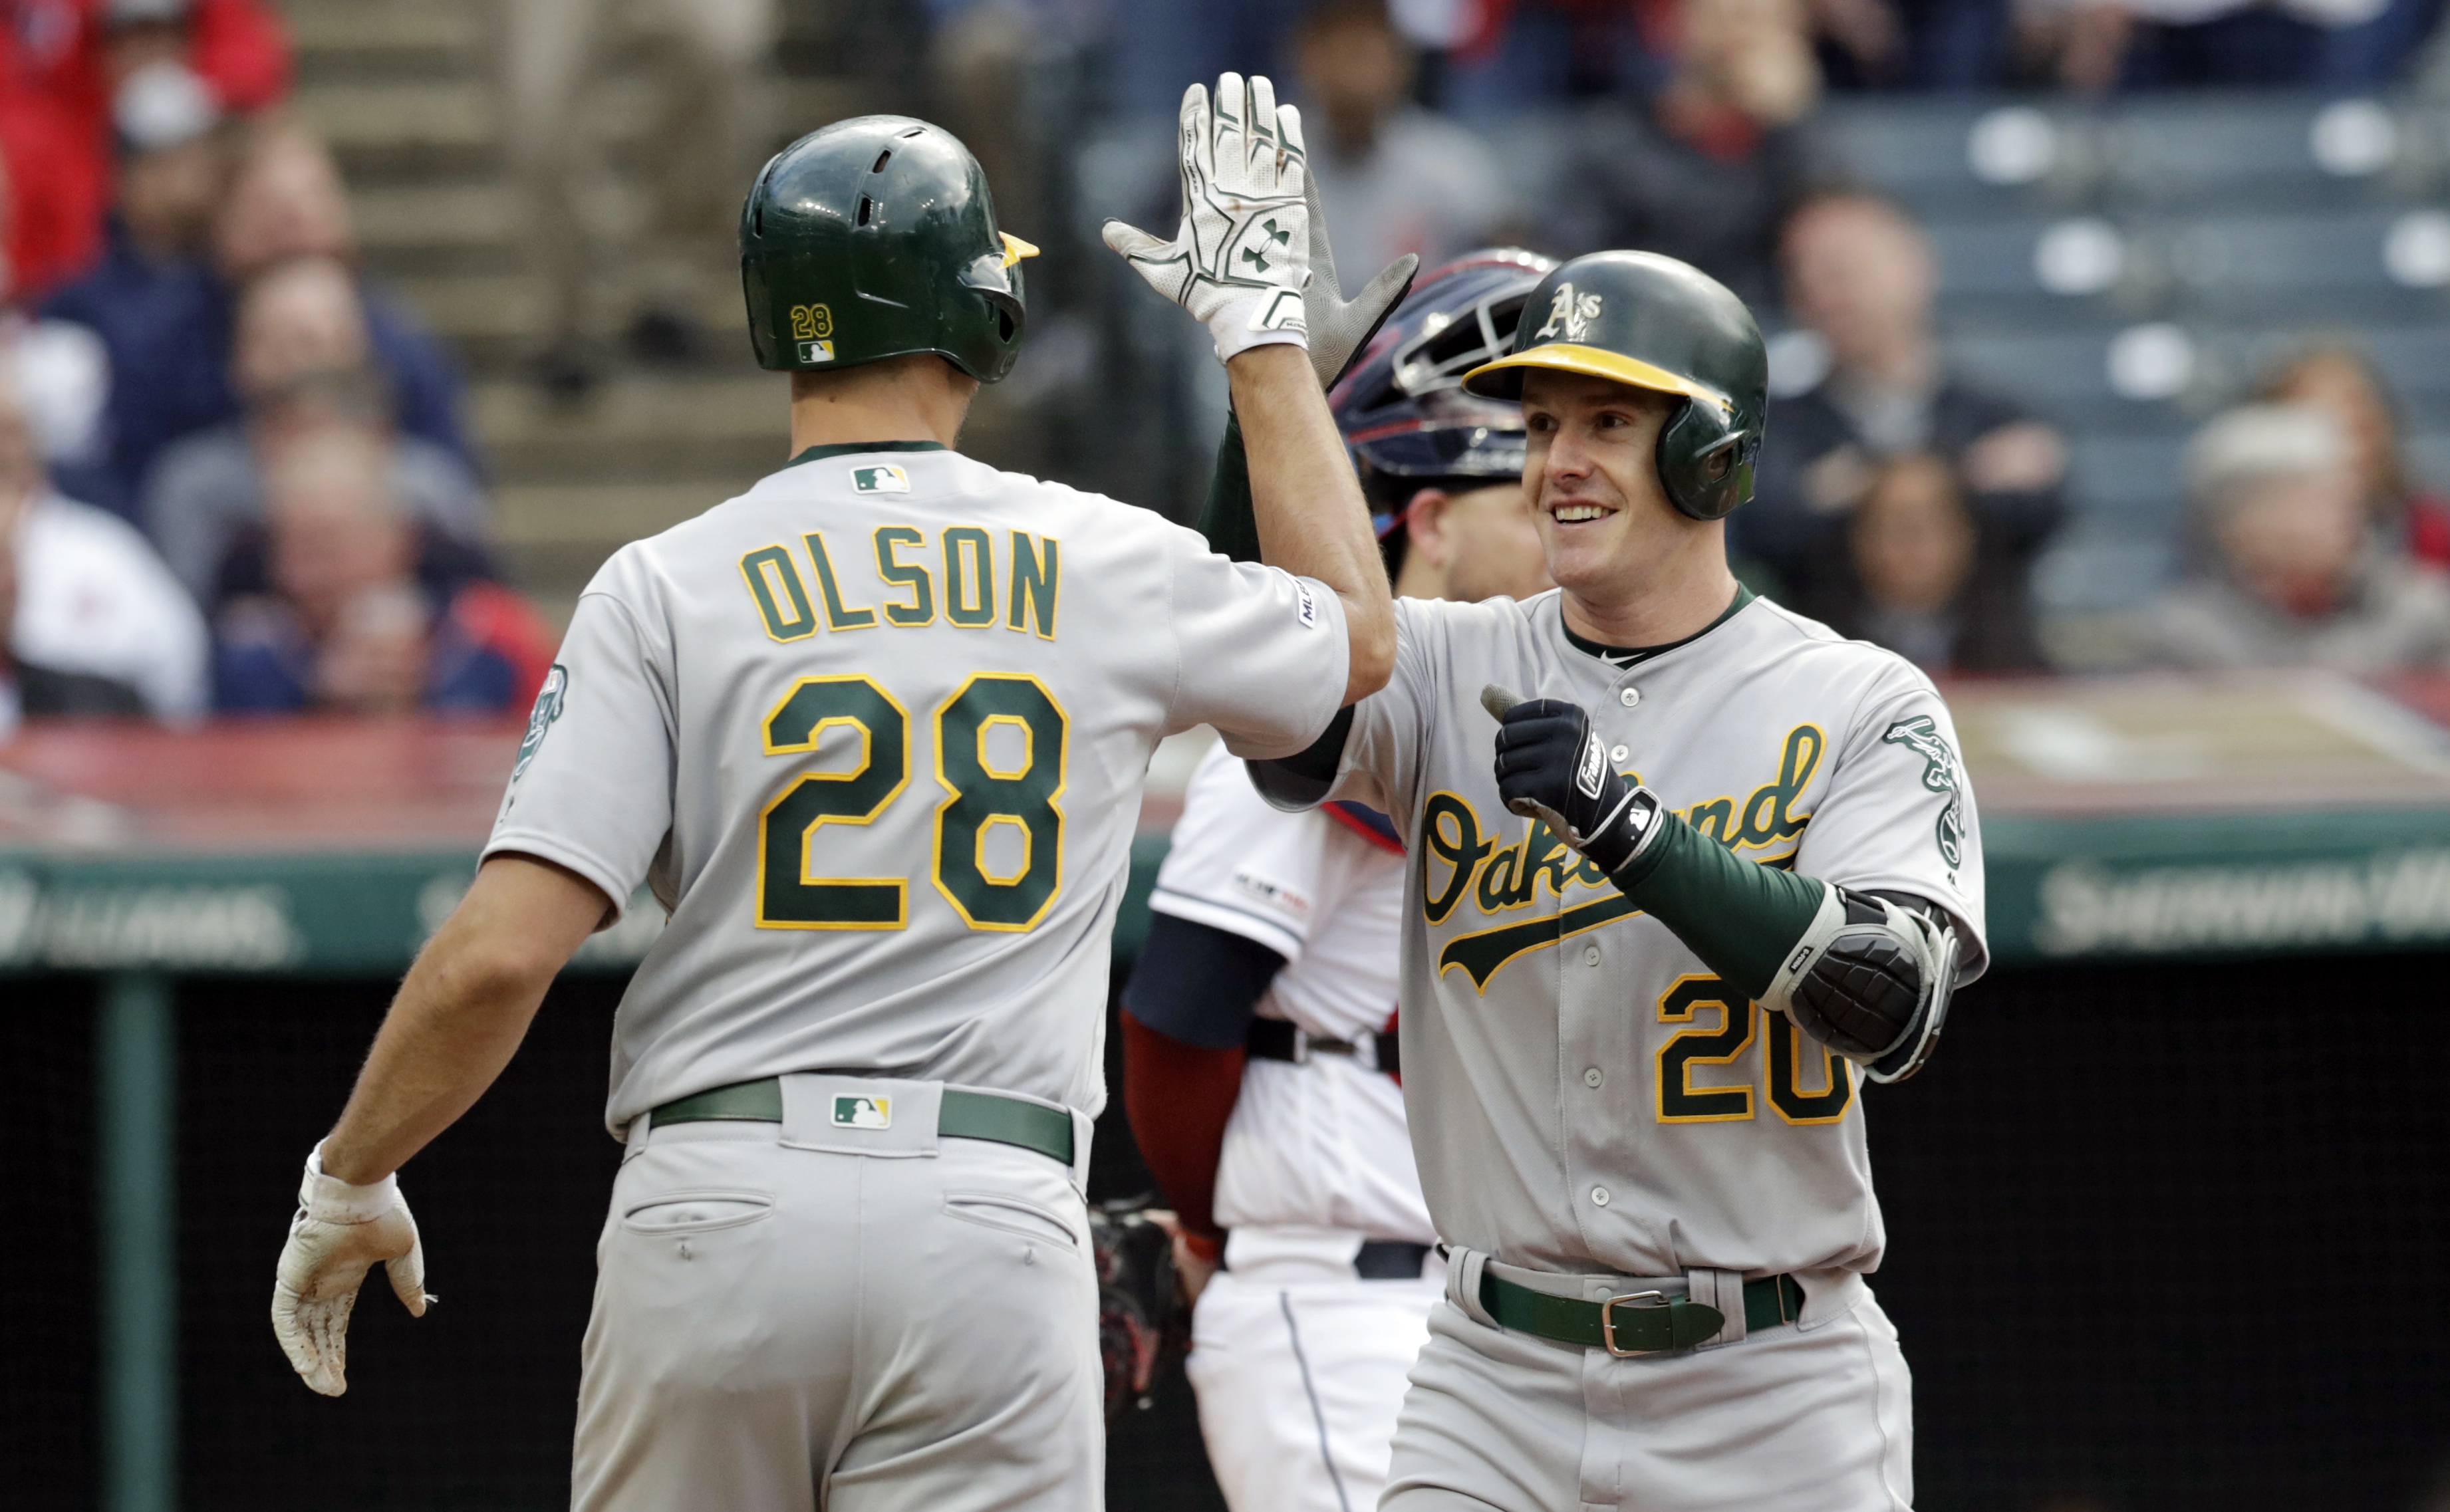 Canha’s pinch-hit homer off Bauer lifts A’s past Indians 5-3